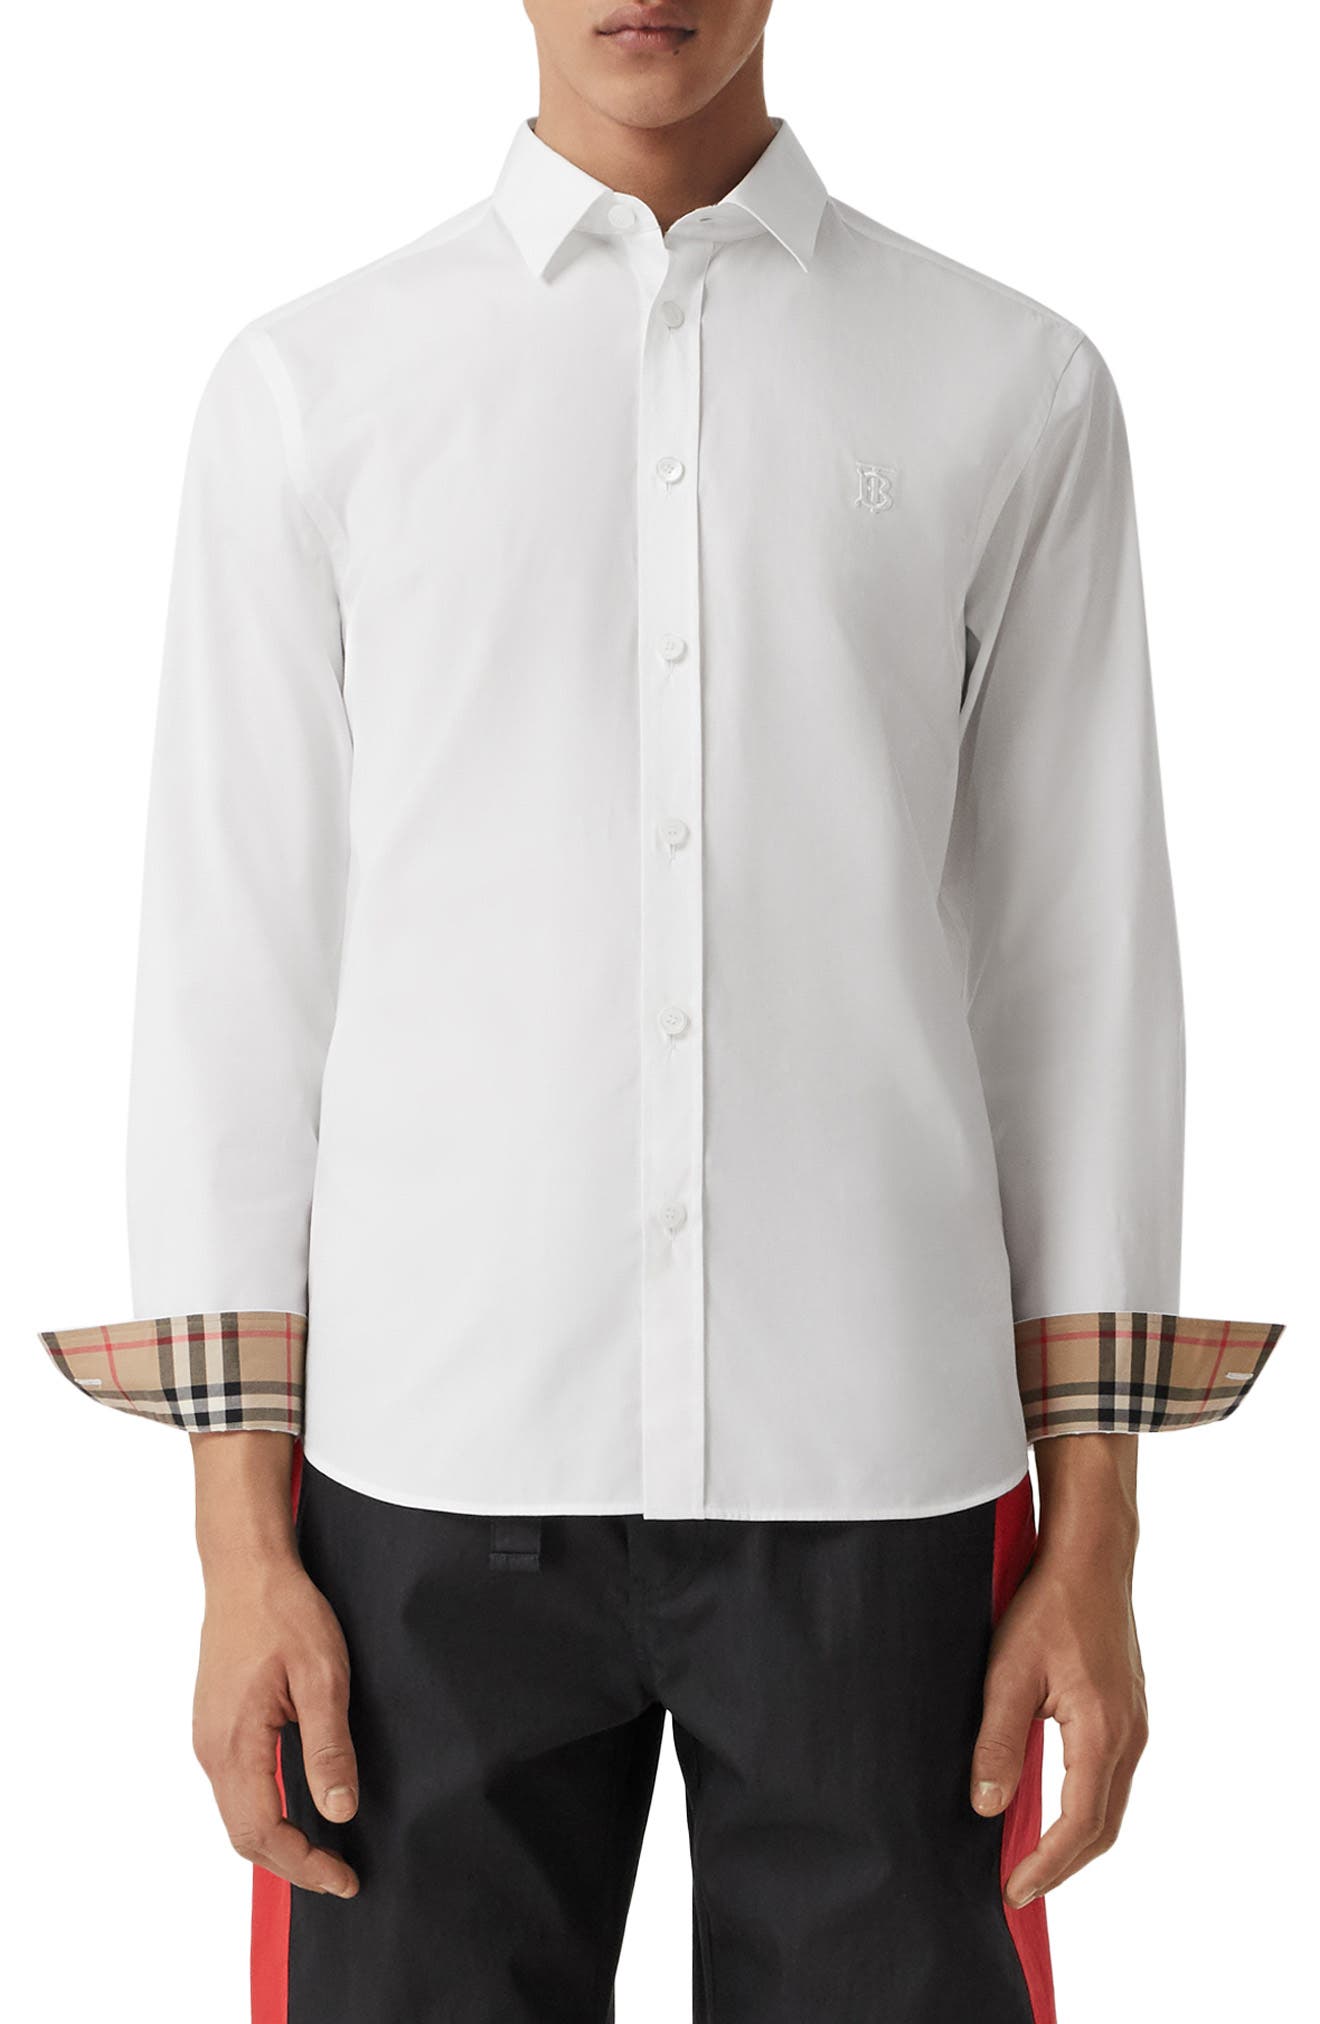 athletic fit button up shirts